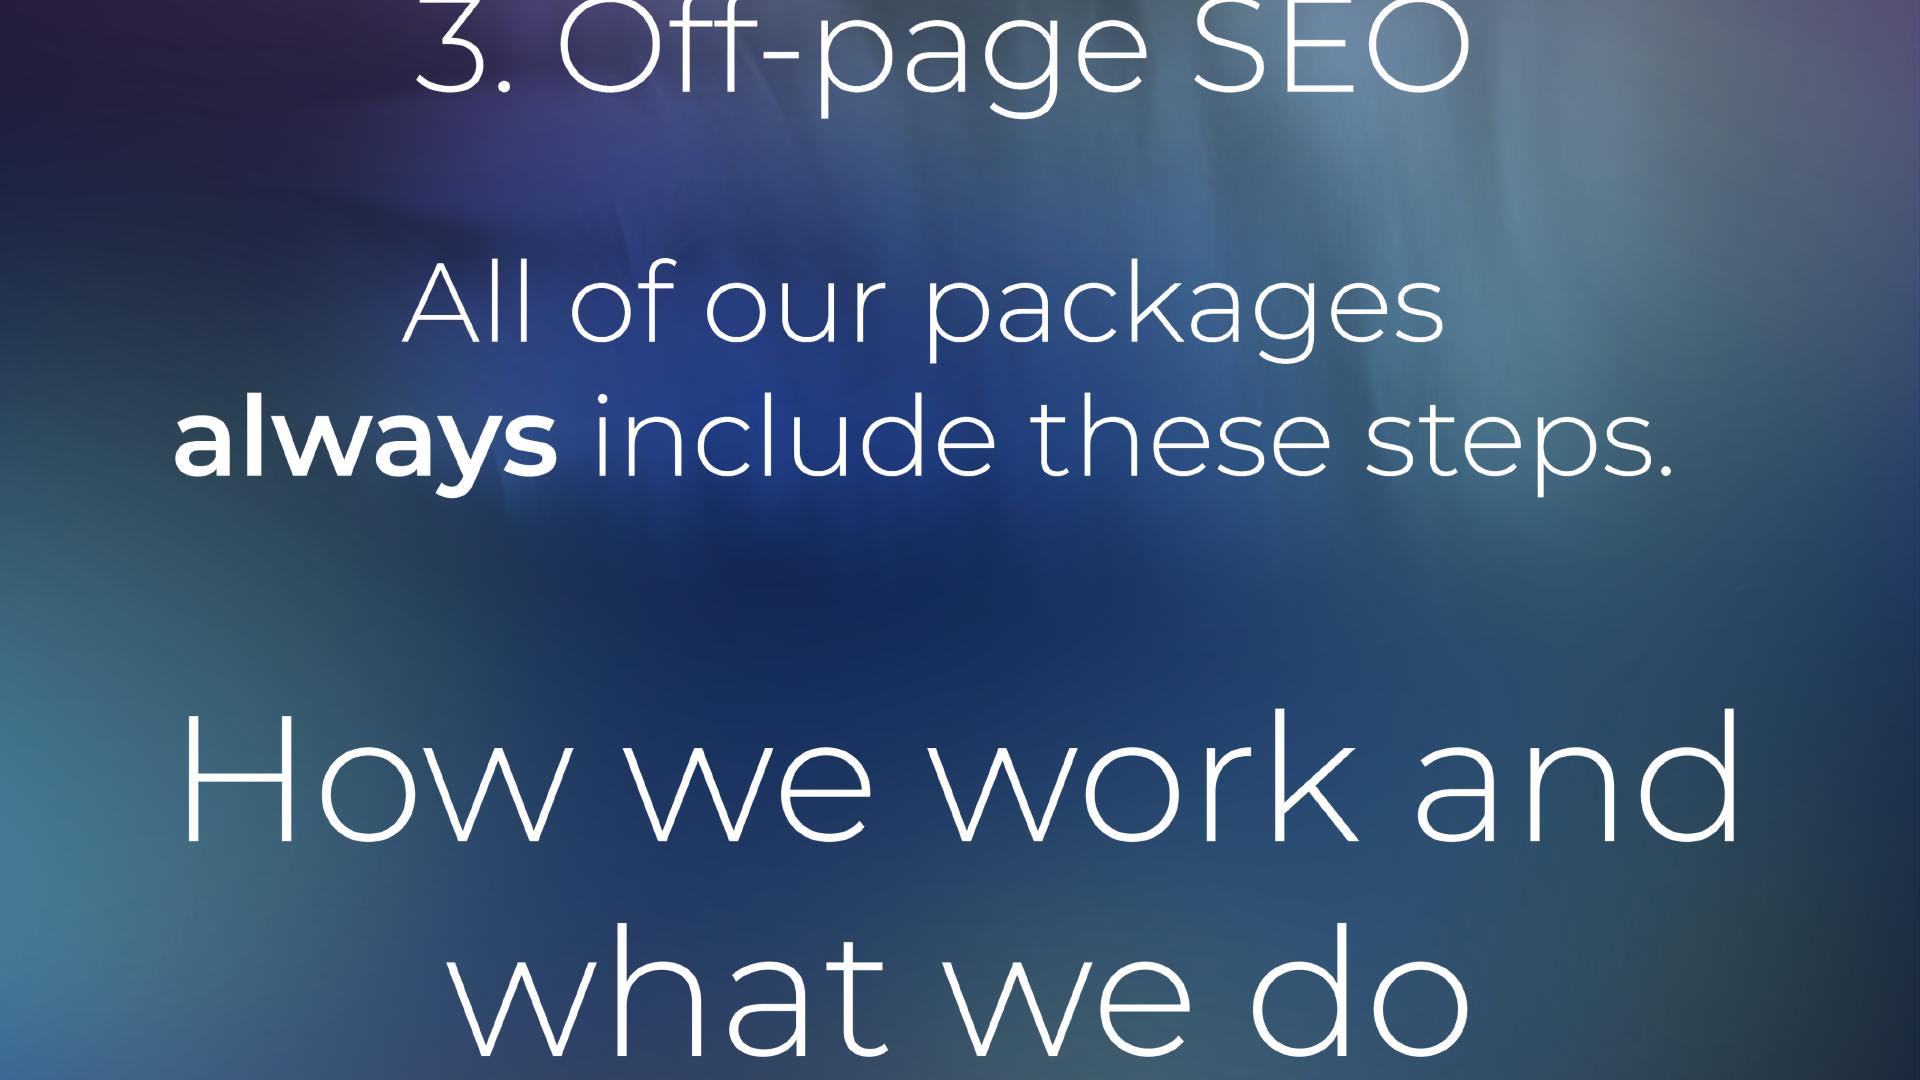 ... 3. Off-page SEO. All of our packages always include these steps. How we work and what we do: